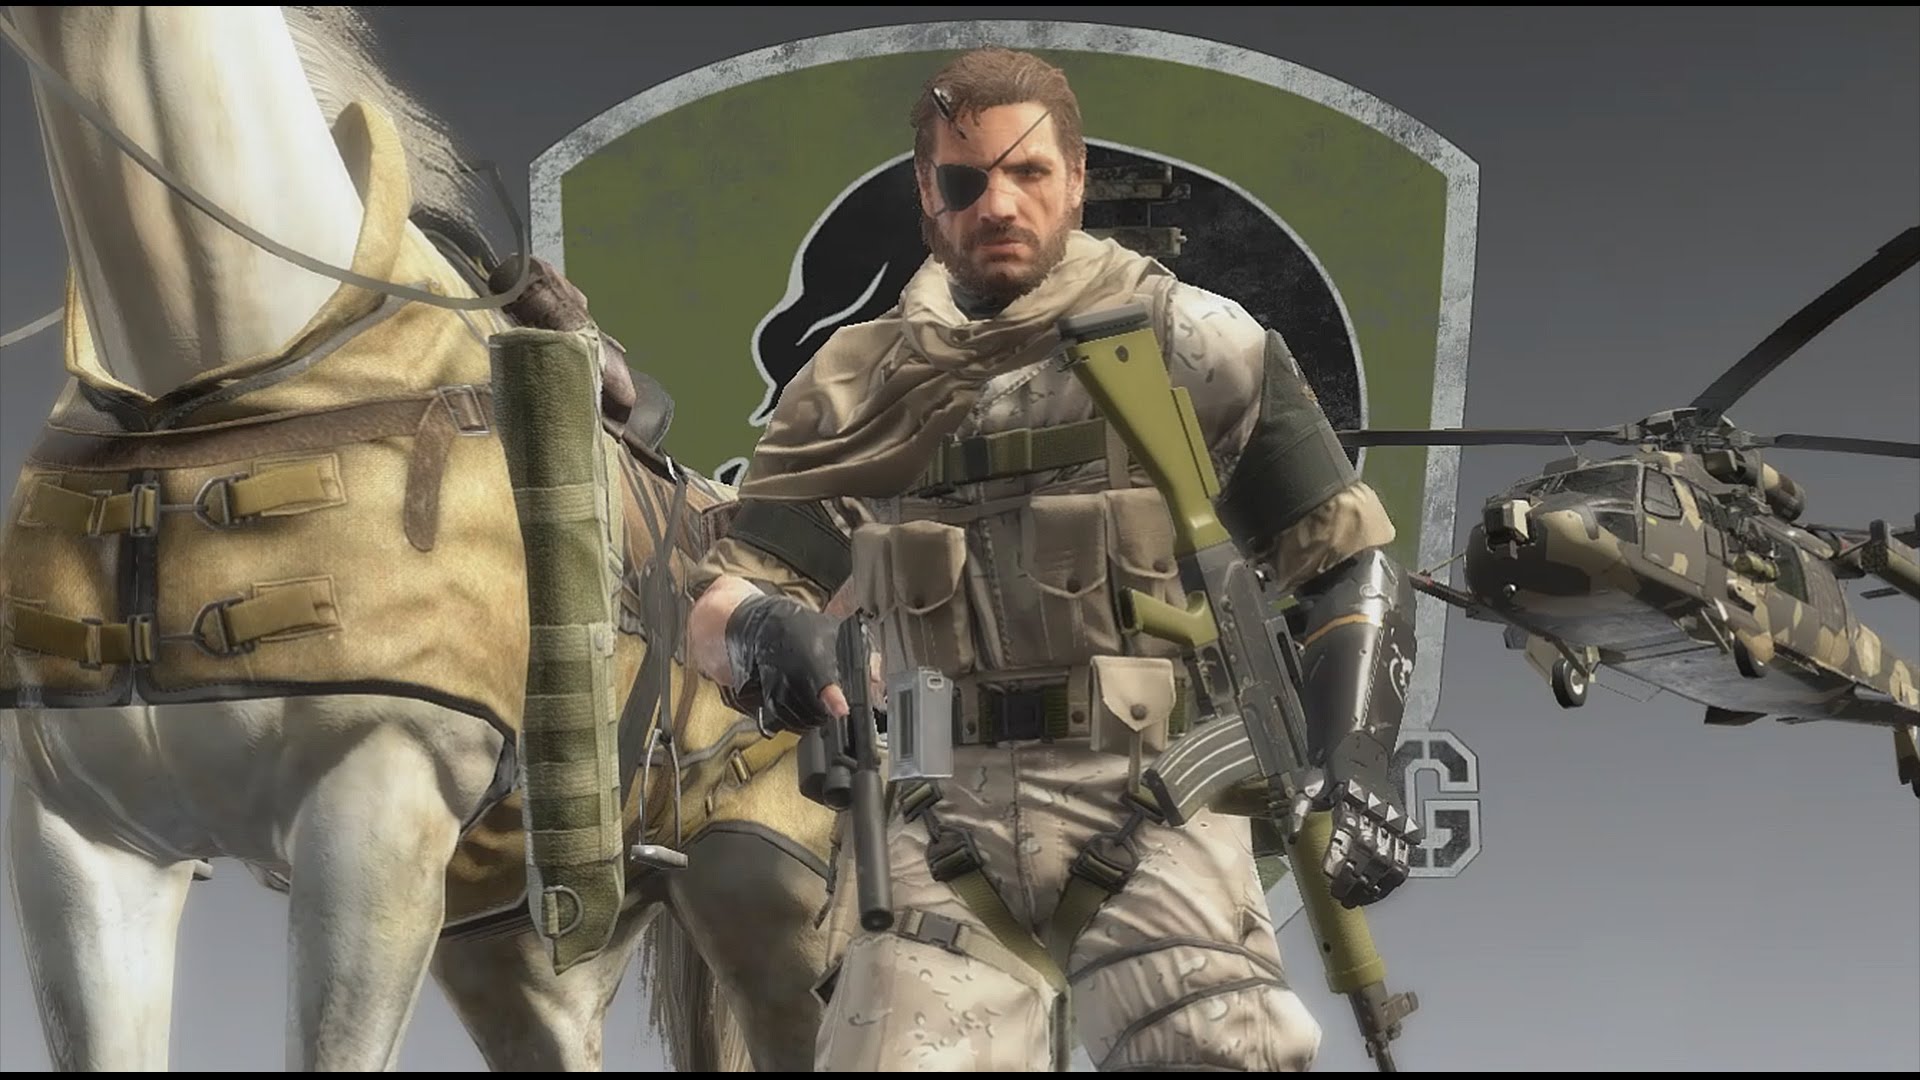 GAME PLAY DEMO - FREE INFILTRATION - METAL GEAR SOLID V: THE PHANTOM PAIN